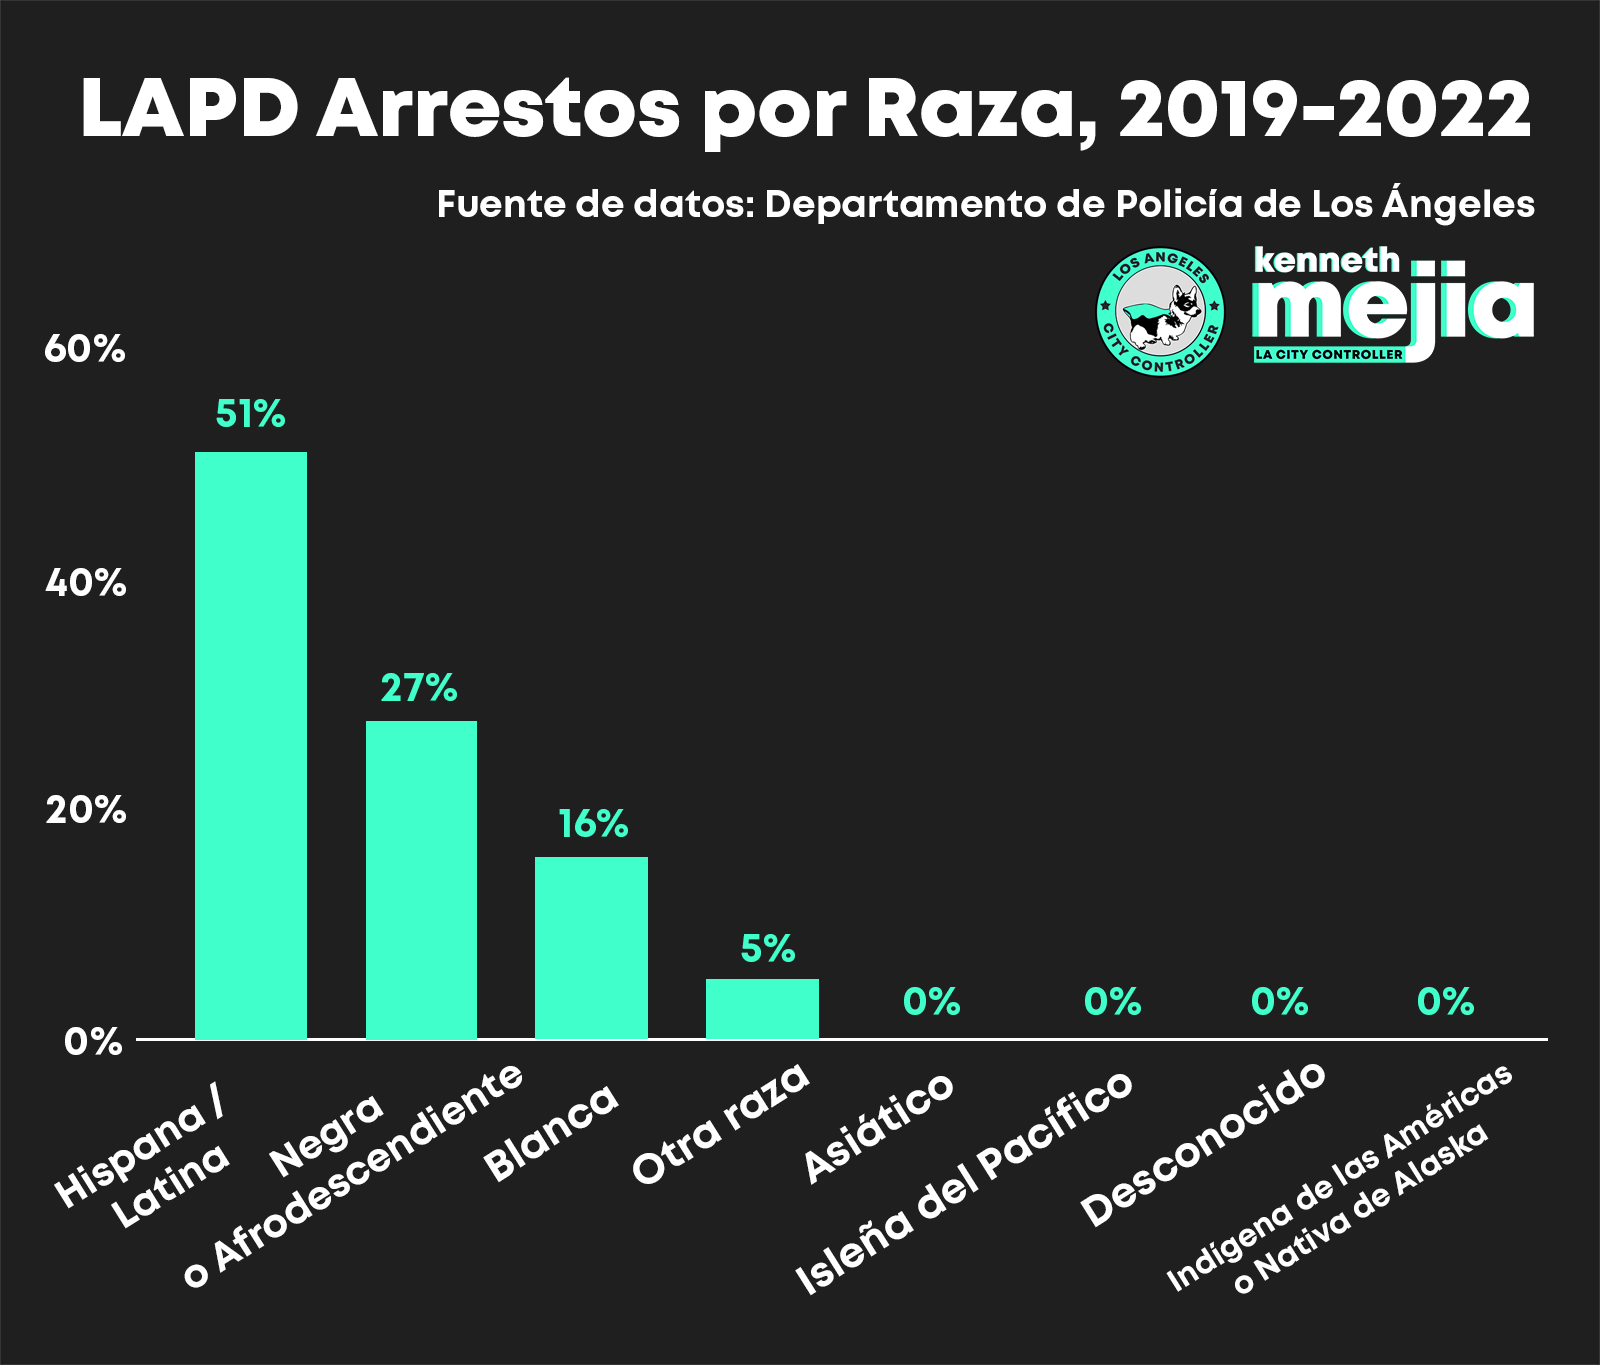 A bar chart of LAPD Arrests by Race, 2019-2022. The tallest bar is Hispanic/Latino, at 51%. Next is Black, at 27%, then White at 16%, then Other at 5%. Total arrests for each of the following 4 race categories are not more than 0%: Asian, Pacific Islander, Unknown, and American Indian/Alaskan Native. The Source of Data is LAPD.